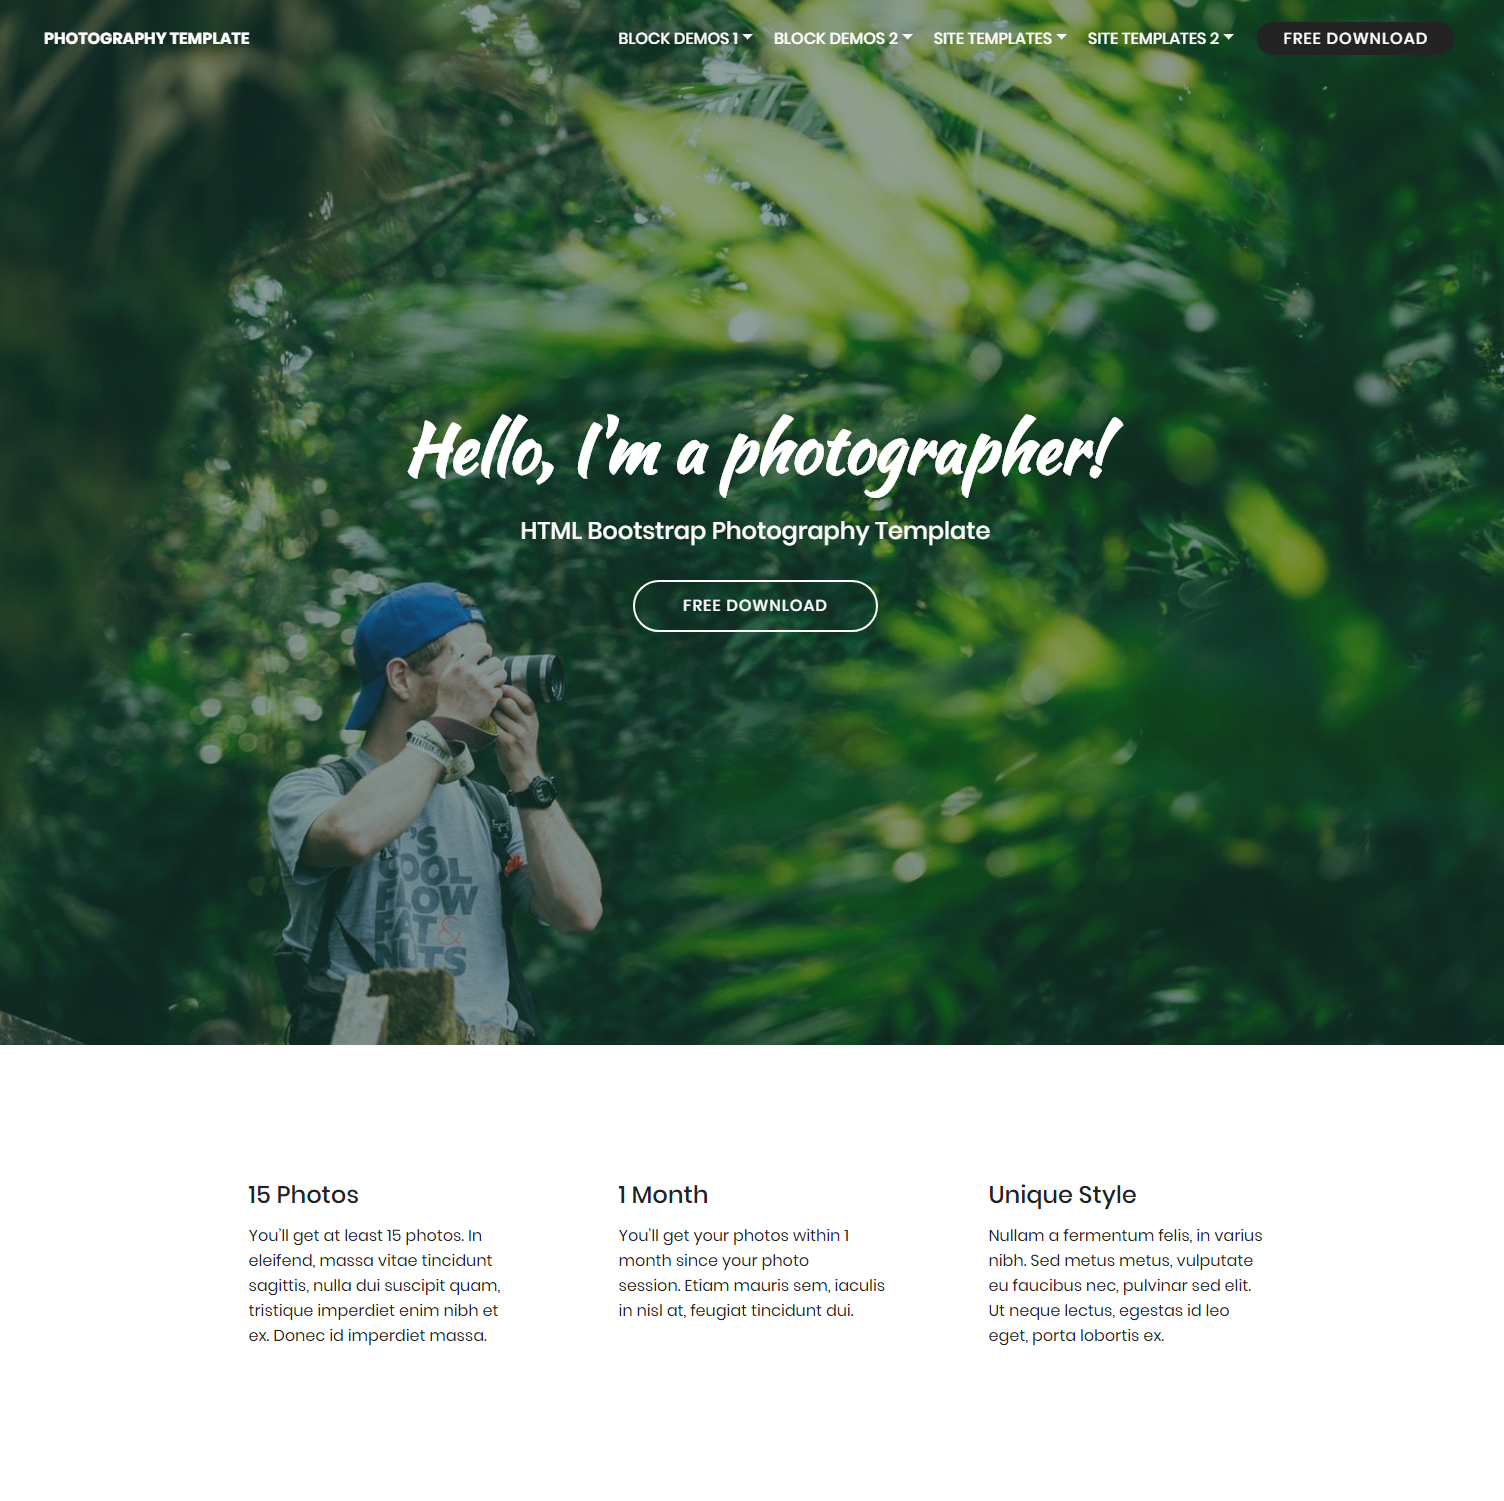 HTML Bootstrap Photography Templates